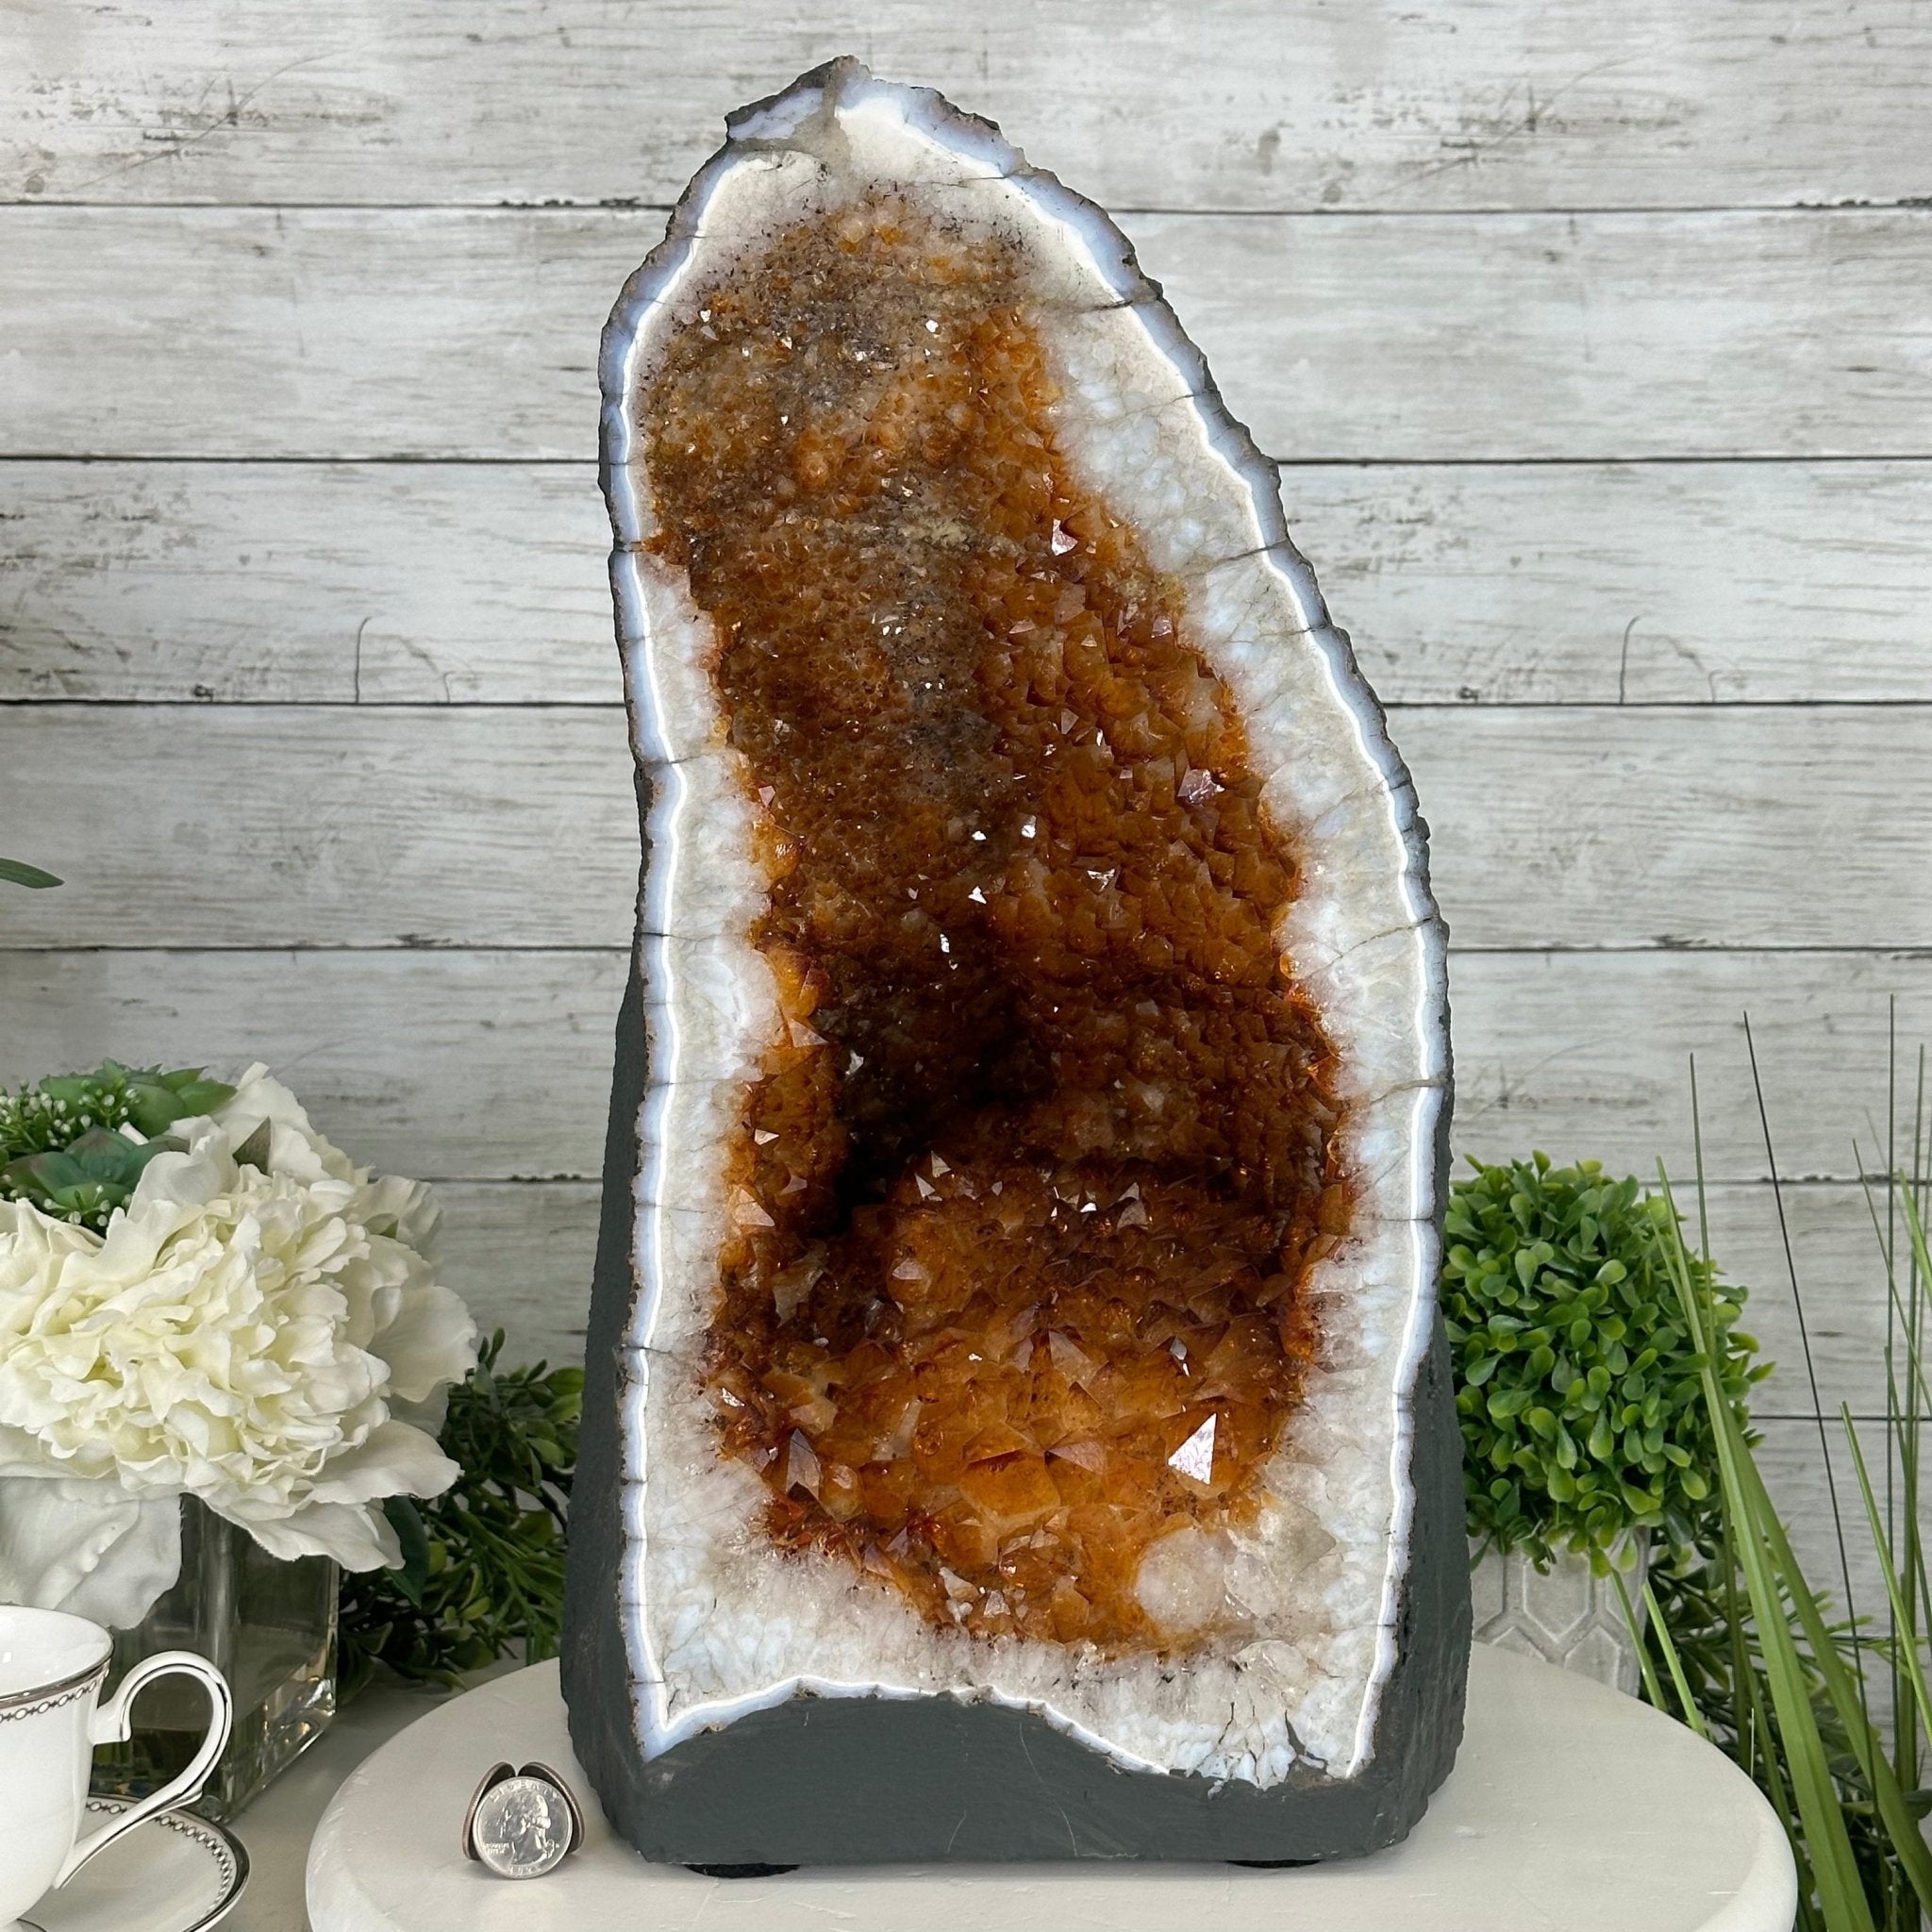 Extra Quality Citrine Cathedral, 50.5 lbs & 17" tall, Model #5603-0273 by Brazil Gems - Brazil GemsBrazil GemsExtra Quality Citrine Cathedral, 50.5 lbs & 17" tall, Model #5603-0273 by Brazil GemsCathedrals5603-0273